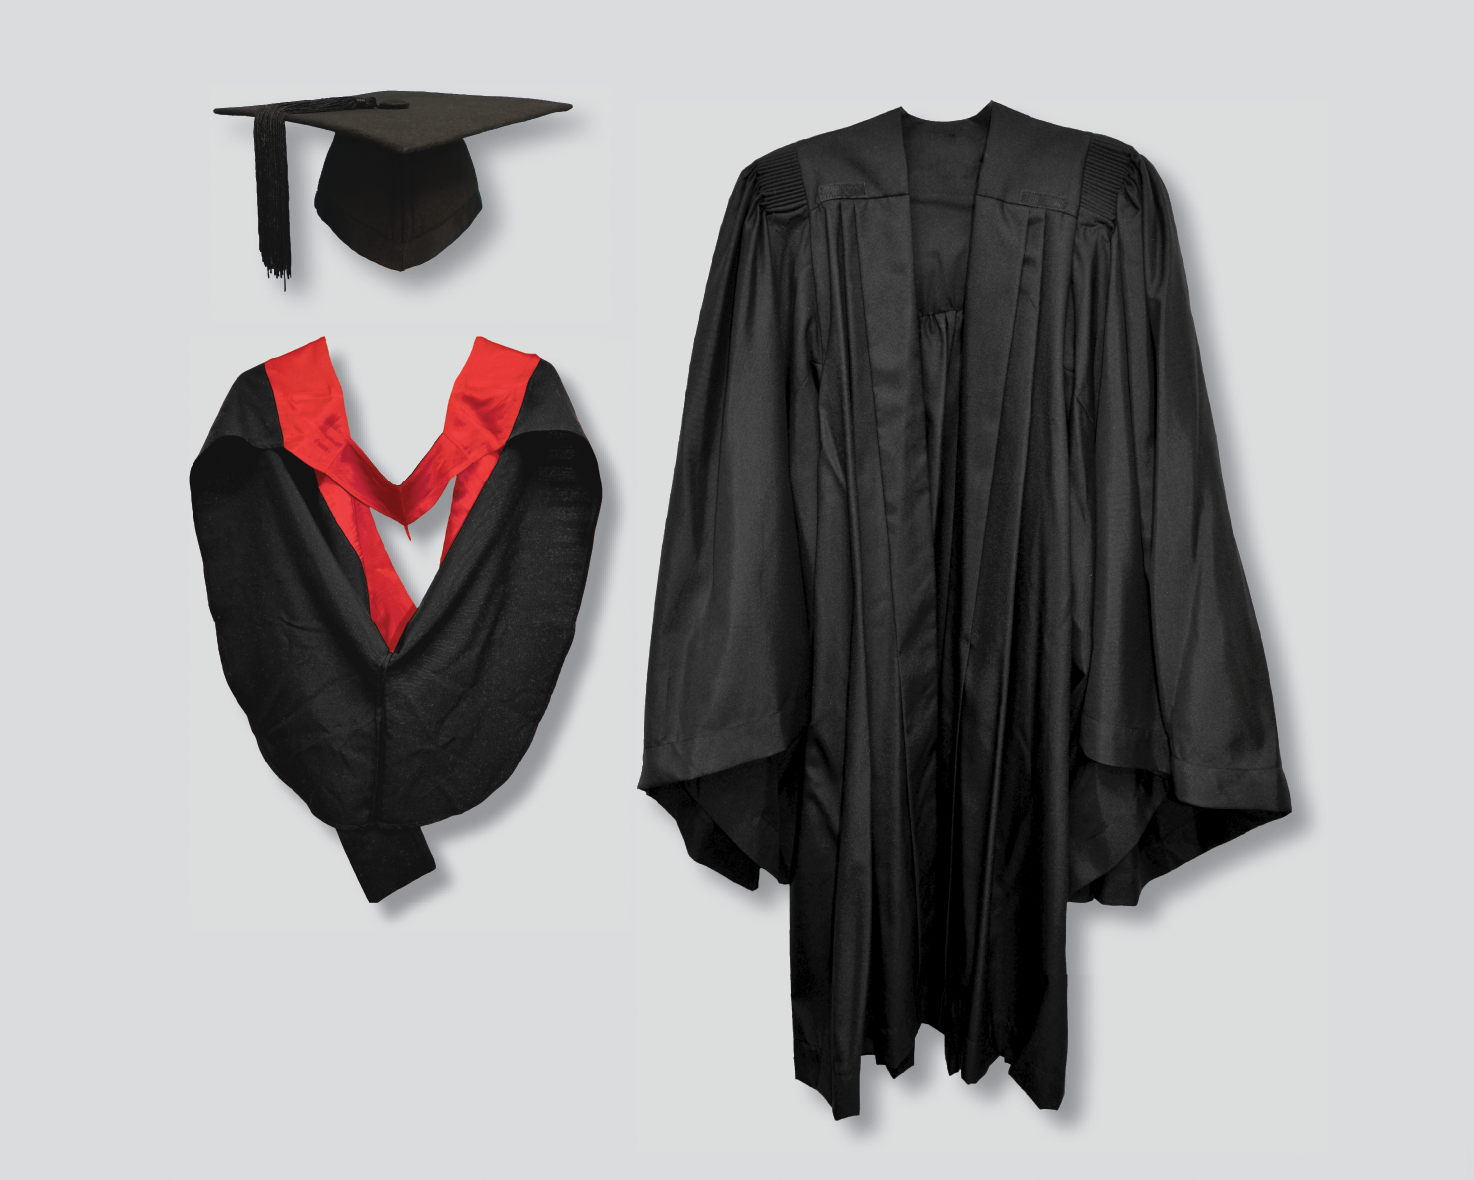 Polyester Graduation Gown And Cap at Rs 375/piece in Bengaluru | ID:  2849536493948